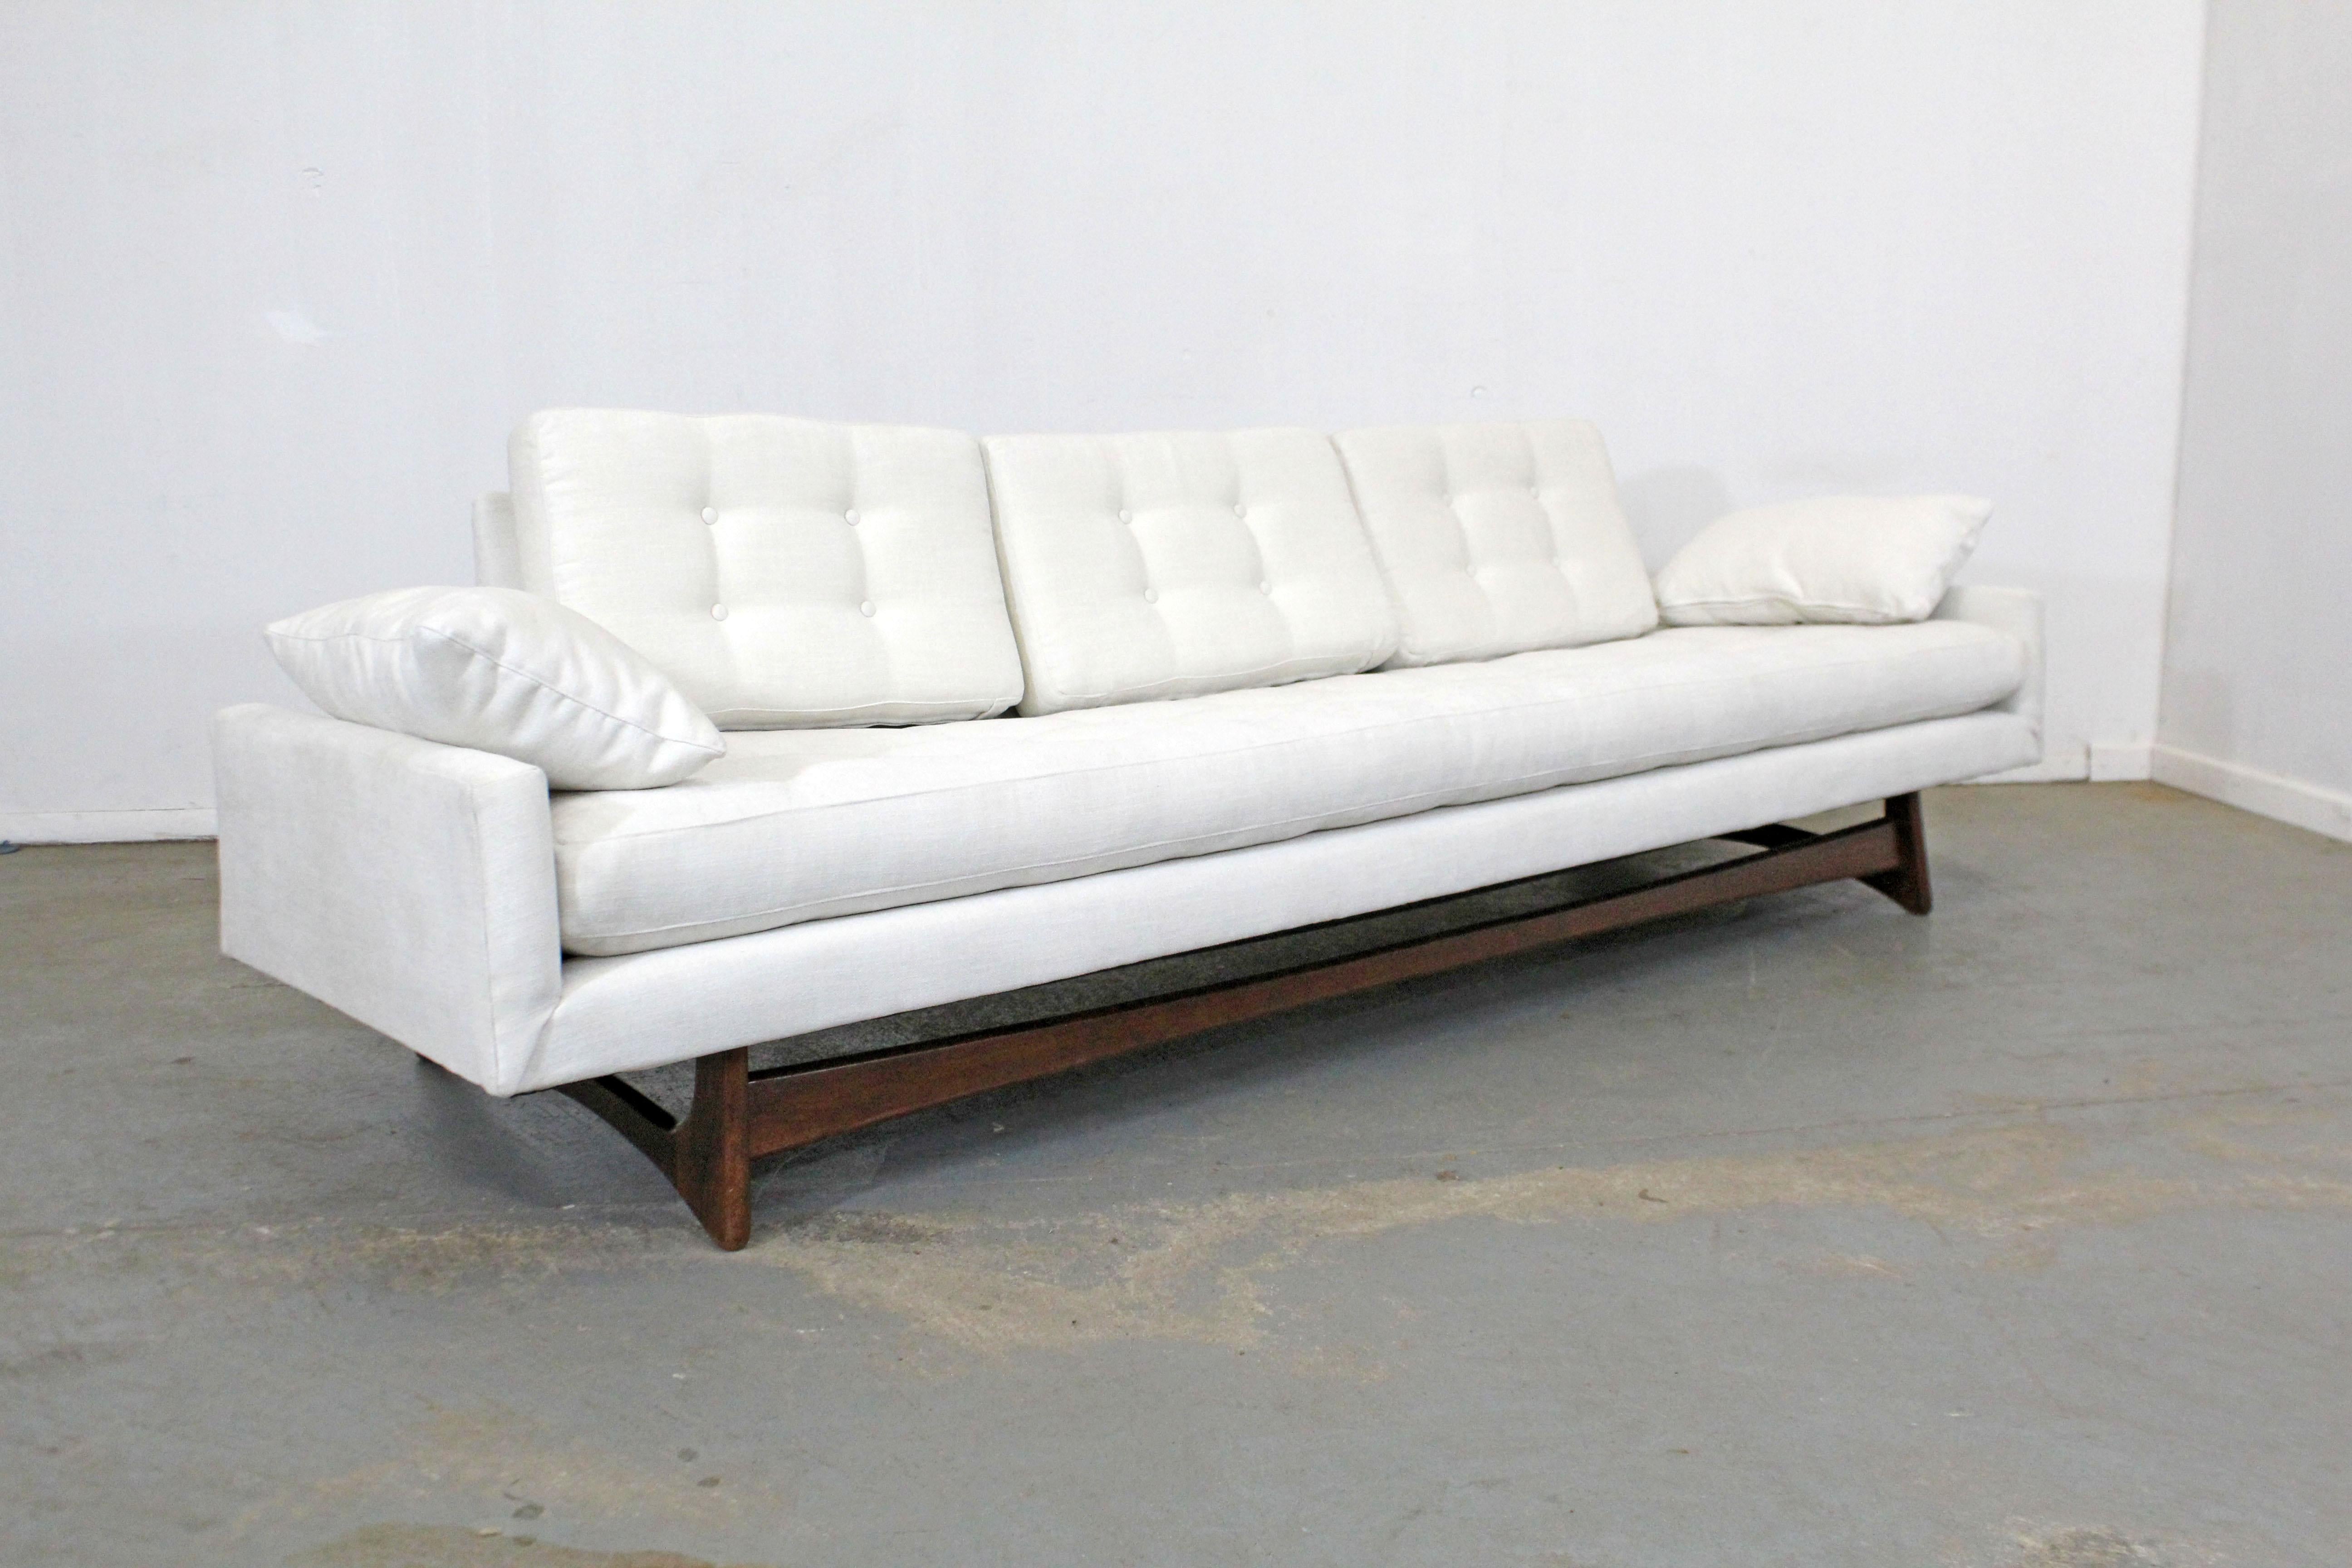 What a find. Offered is a beautifully restored 'Gondola' sofa (model 2408) designed by Adrian Pearsall for Craft Associates. Features refinished sculpted wood legs and has been reupholstered with textured designer fabric in 'Pontiac Coconut' by